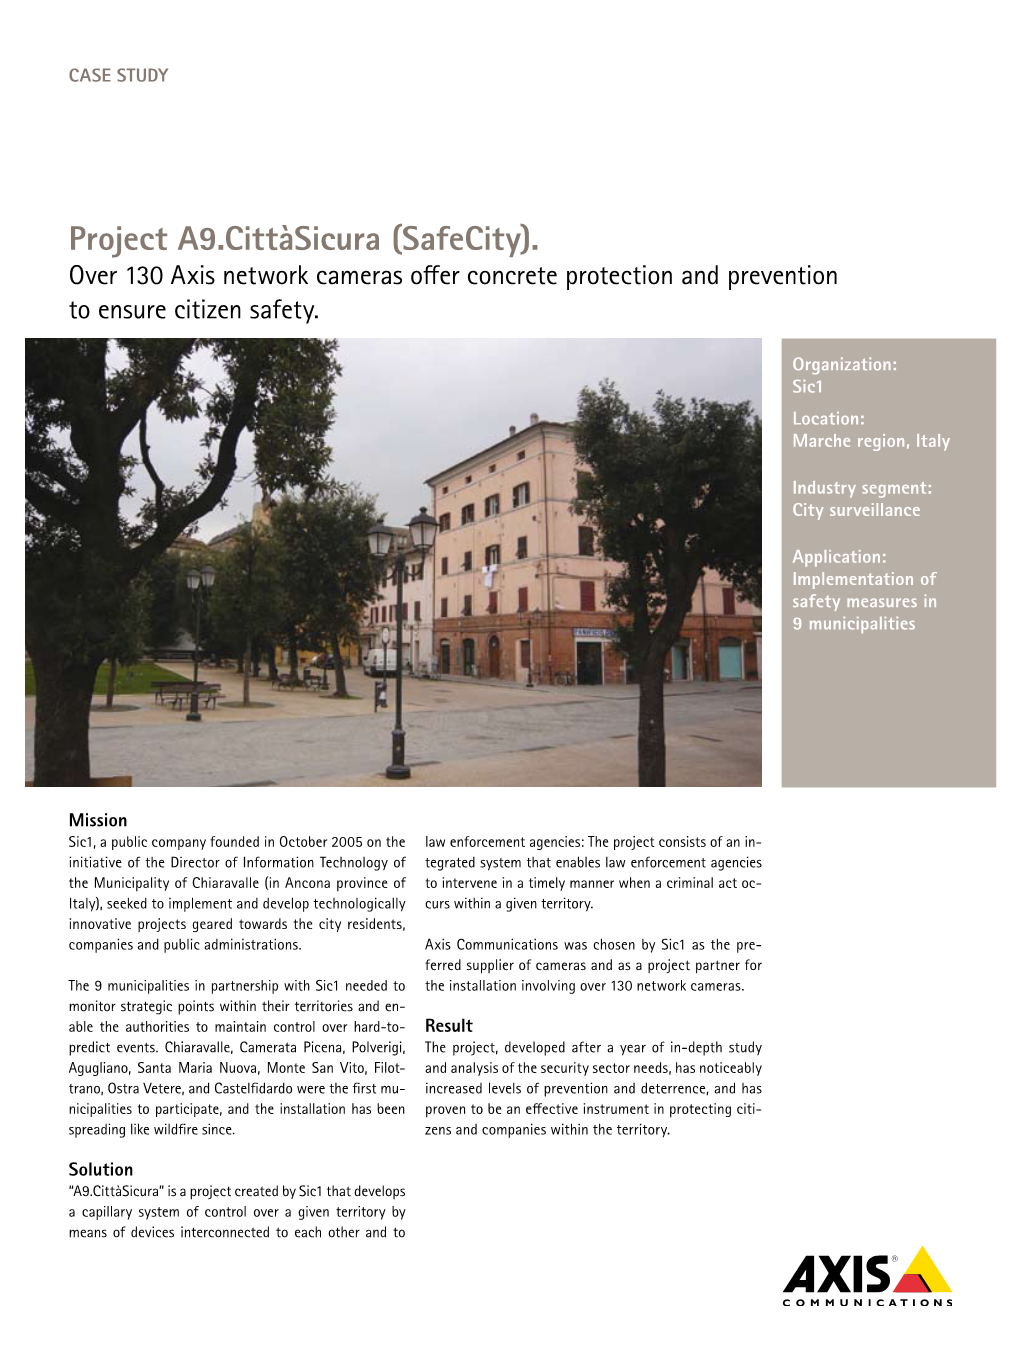 Project A9.Cittàsicura (Safecity). Over 130 Axis Network Cameras Offer Concrete Protection and Prevention to Ensure Citizen Safety